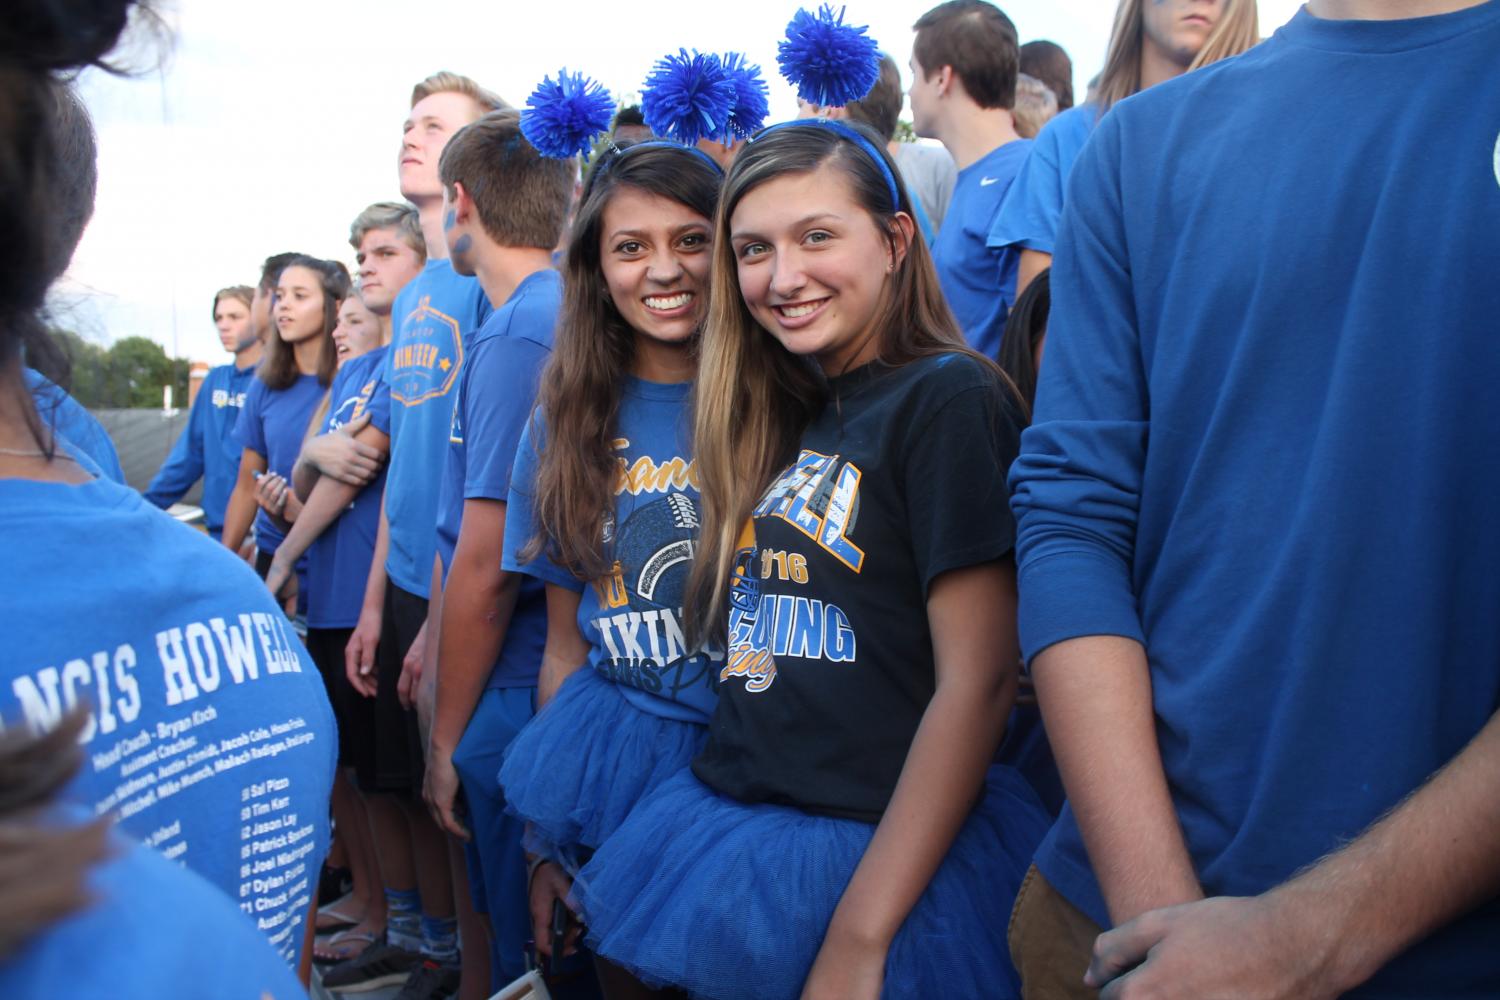 Dressed+in+blue+from+head-to-toe%2C+juniors+Sophia+Rizzo+and+Kennedy+Brewer+smile+for+the+camera+at+the+first+home+football+game.+Rizzo+and+Brewer+stood+in+the+superfan+section+wearing+matching+tutus+and+headbands+at+the+blue-out+game+on+Aug.+18.+%E2%80%9CI+love+how+our+school+is+so+hype+and+all+for+school+spirit%2C%E2%80%9D+Rizzo+said.